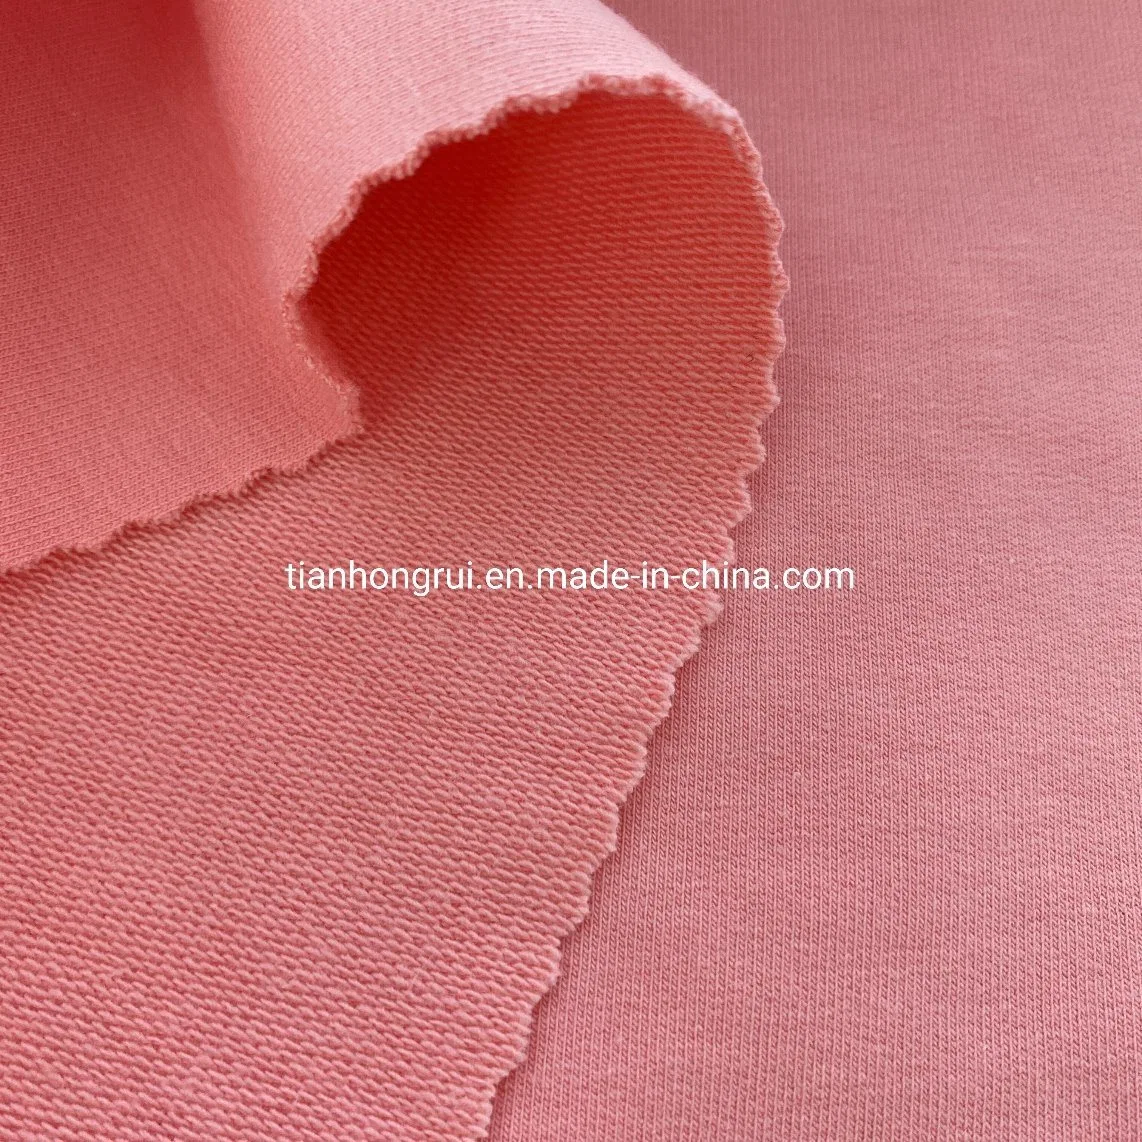 Cotton Polyester Spandex Looped Crocheting Fabric